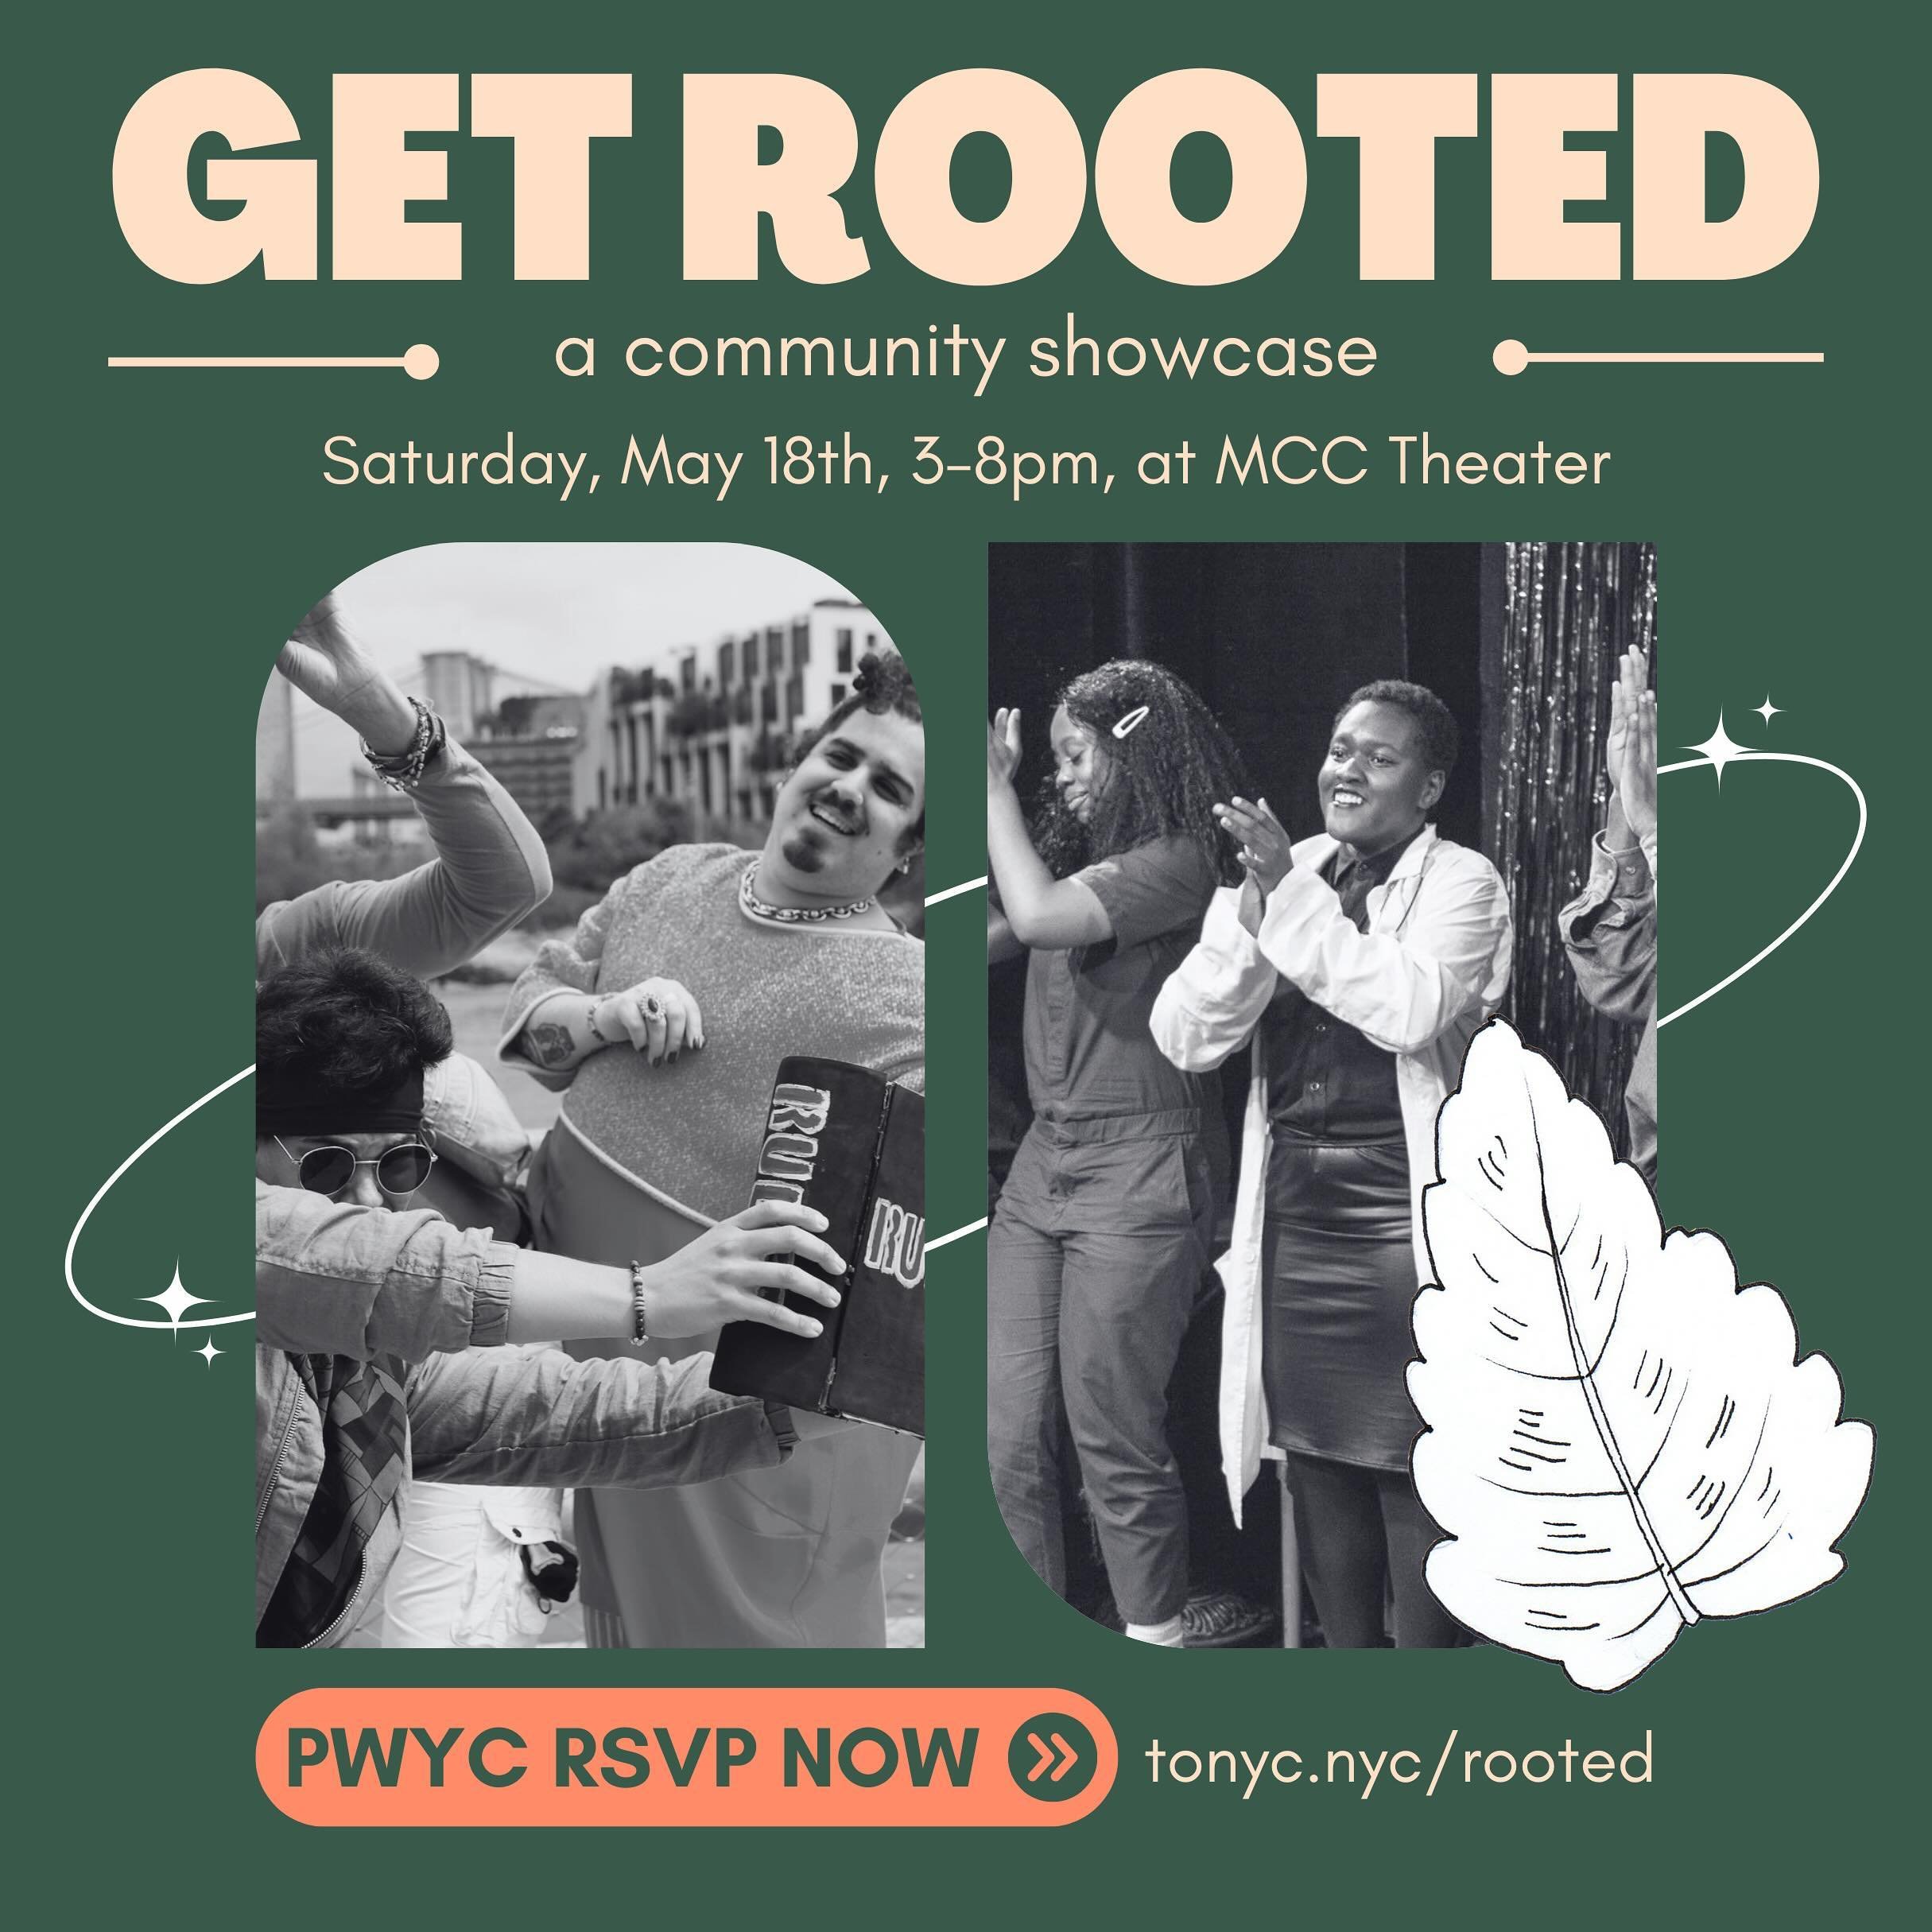 if you've been curious about theatre of the oppressed nyc, i have the perfect opportunity for you to plug in: next saturday, may 18th, we'll be presenting &quot;get rooted: a community showcase&quot; at mcc theater, with pay-what-you-choose programmi